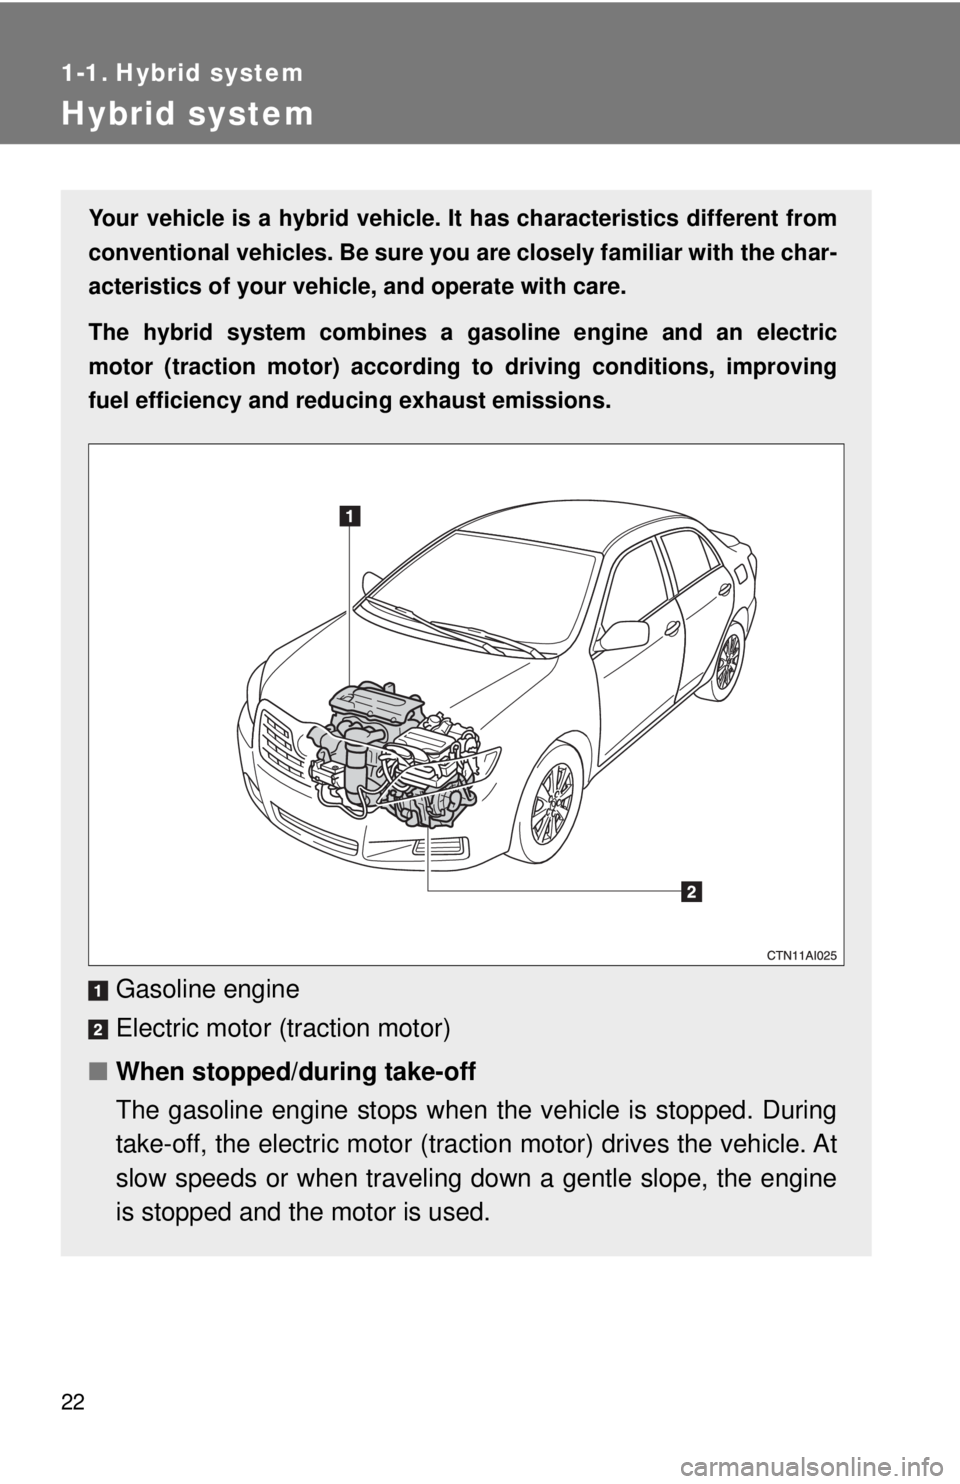 TOYOTA CAMRY HV 2009  Owners Manual 22
1-1. Hybrid system
Hybrid system
Your vehicle is a hybrid vehicle. It has characteristics different from
conventional vehicles. Be sure you are closely familiar with the char-
acteristics of your v